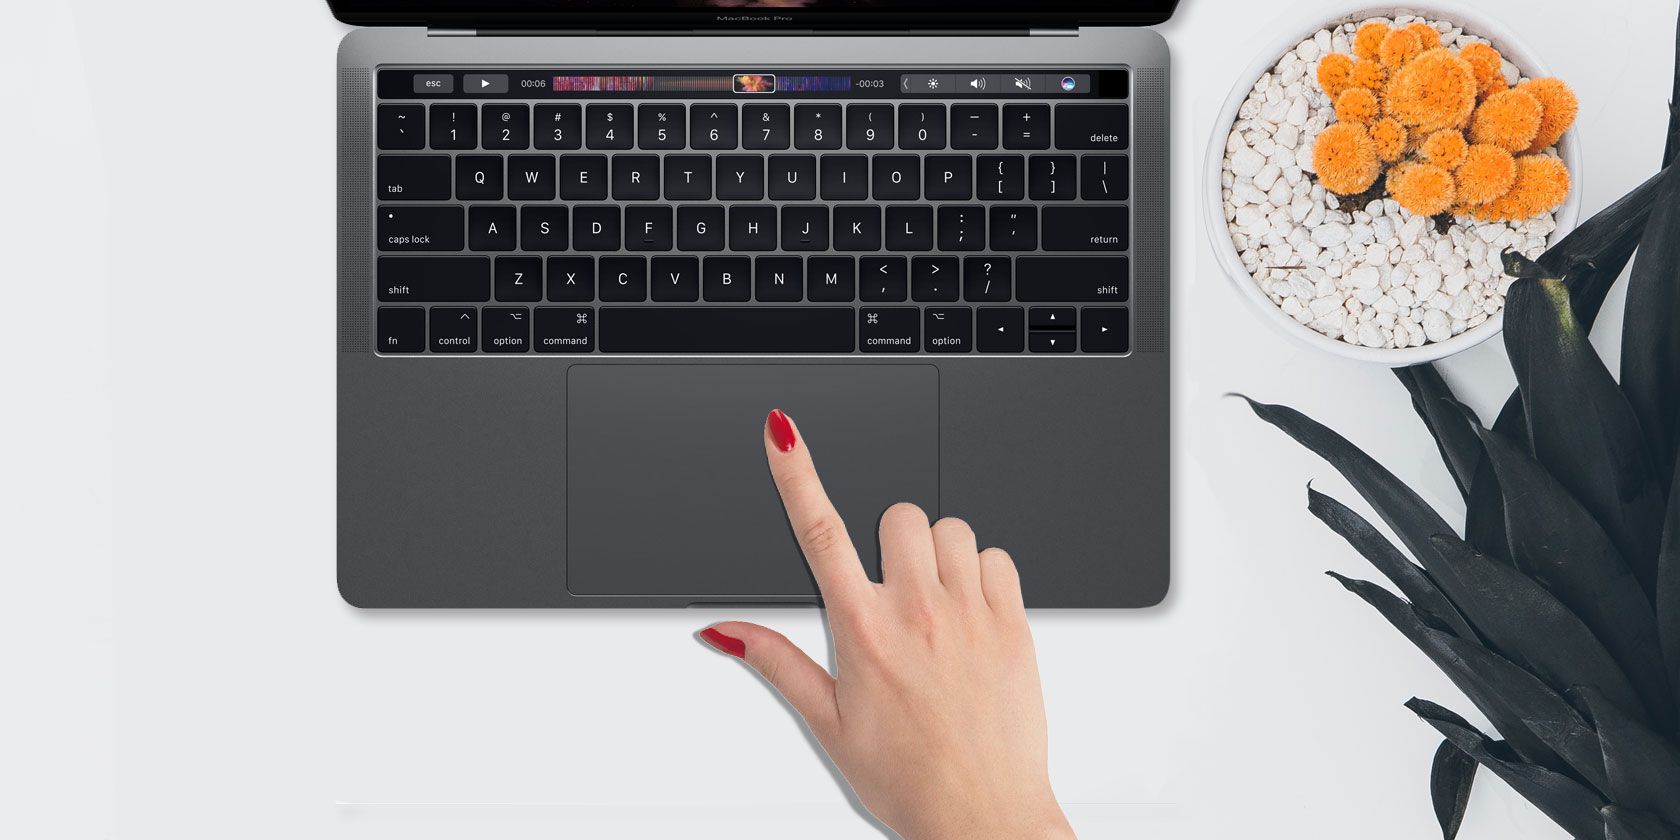 what are the cmd codes for mac trackpad gestures